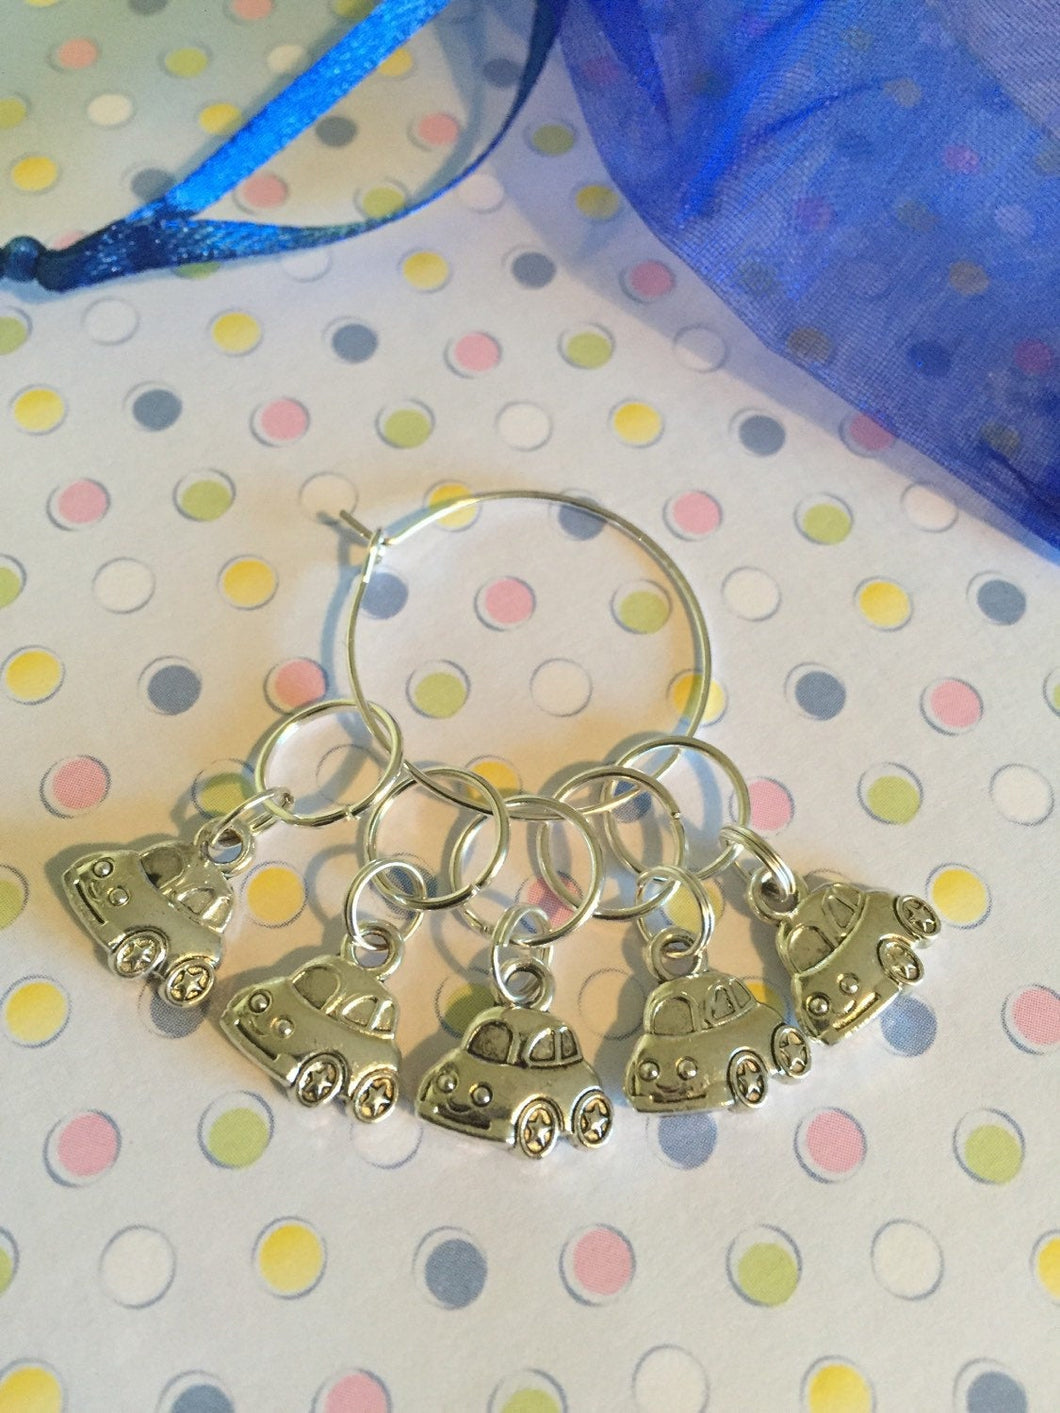 Set of 5 Cars Stitch Markers